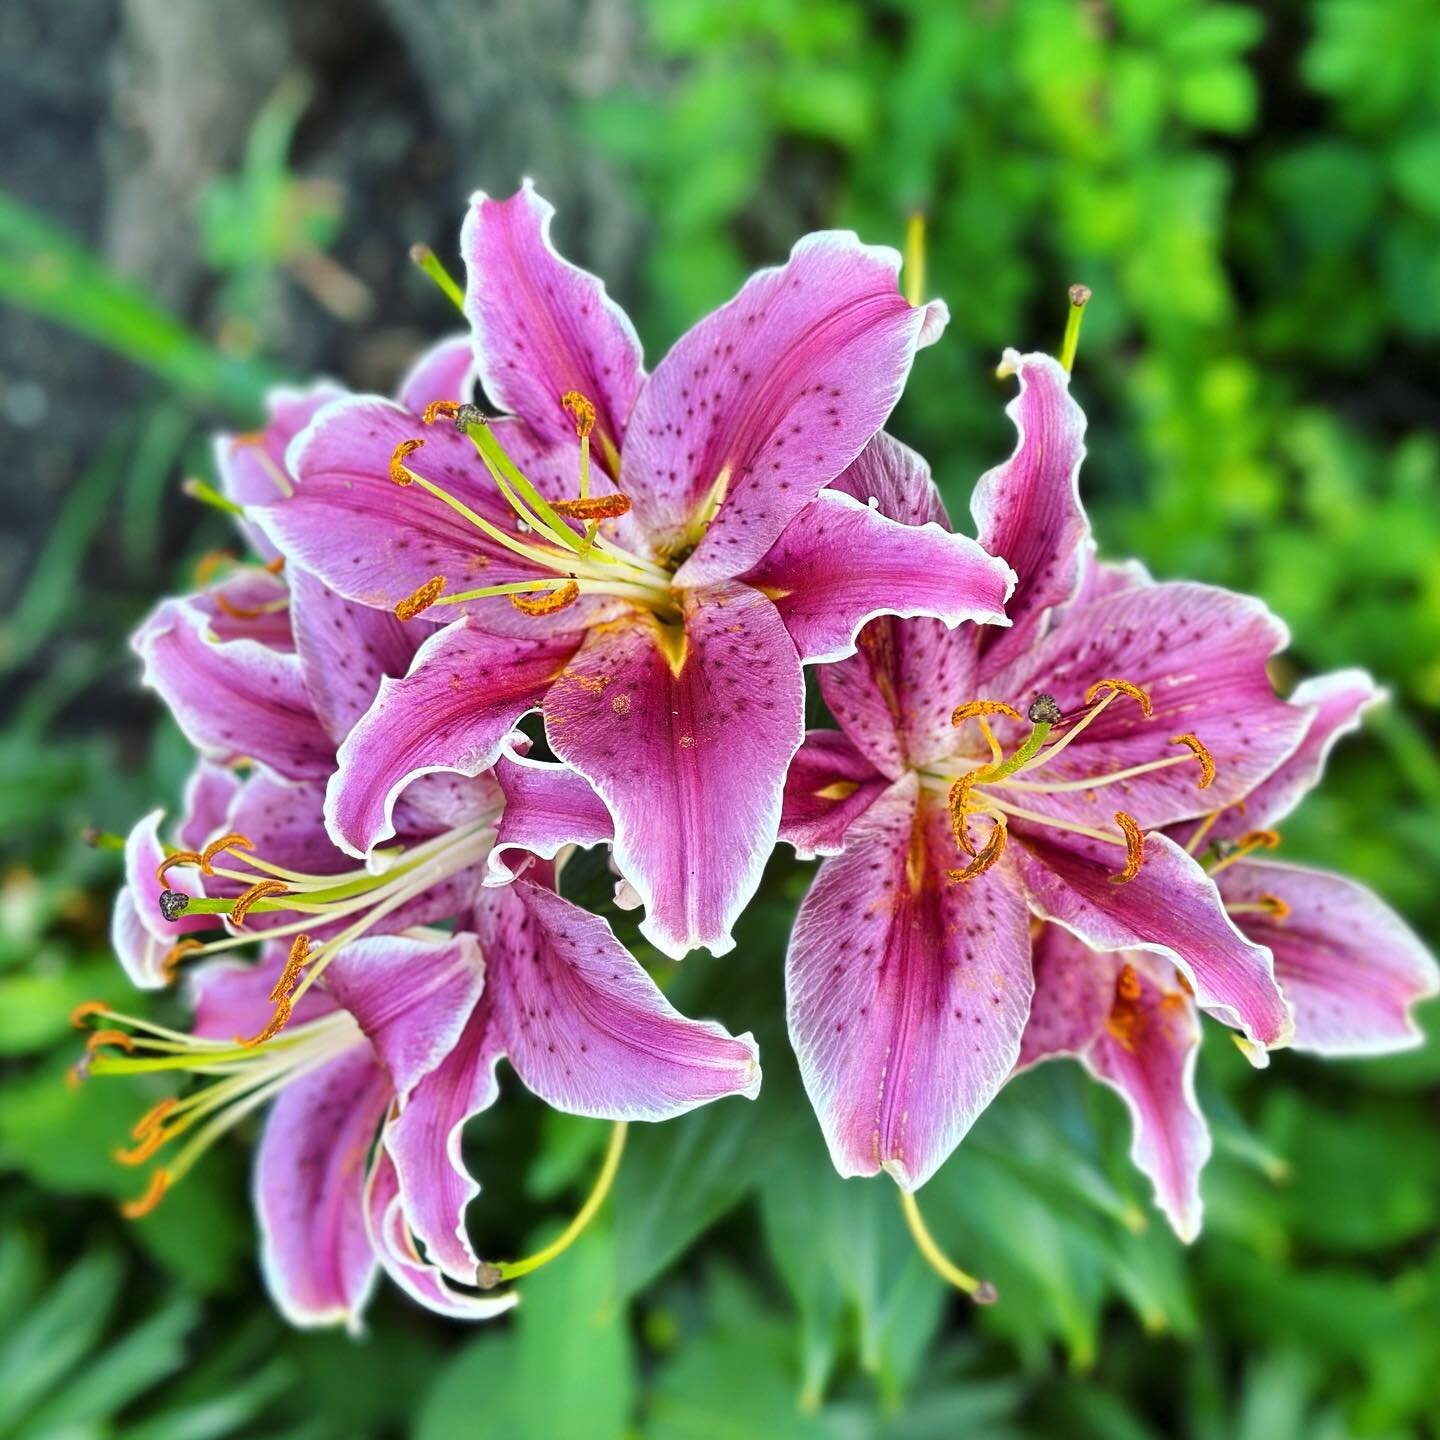 Japanese lily. Gorgeous but deadly to cats. Beware. Photographed 7.23.23